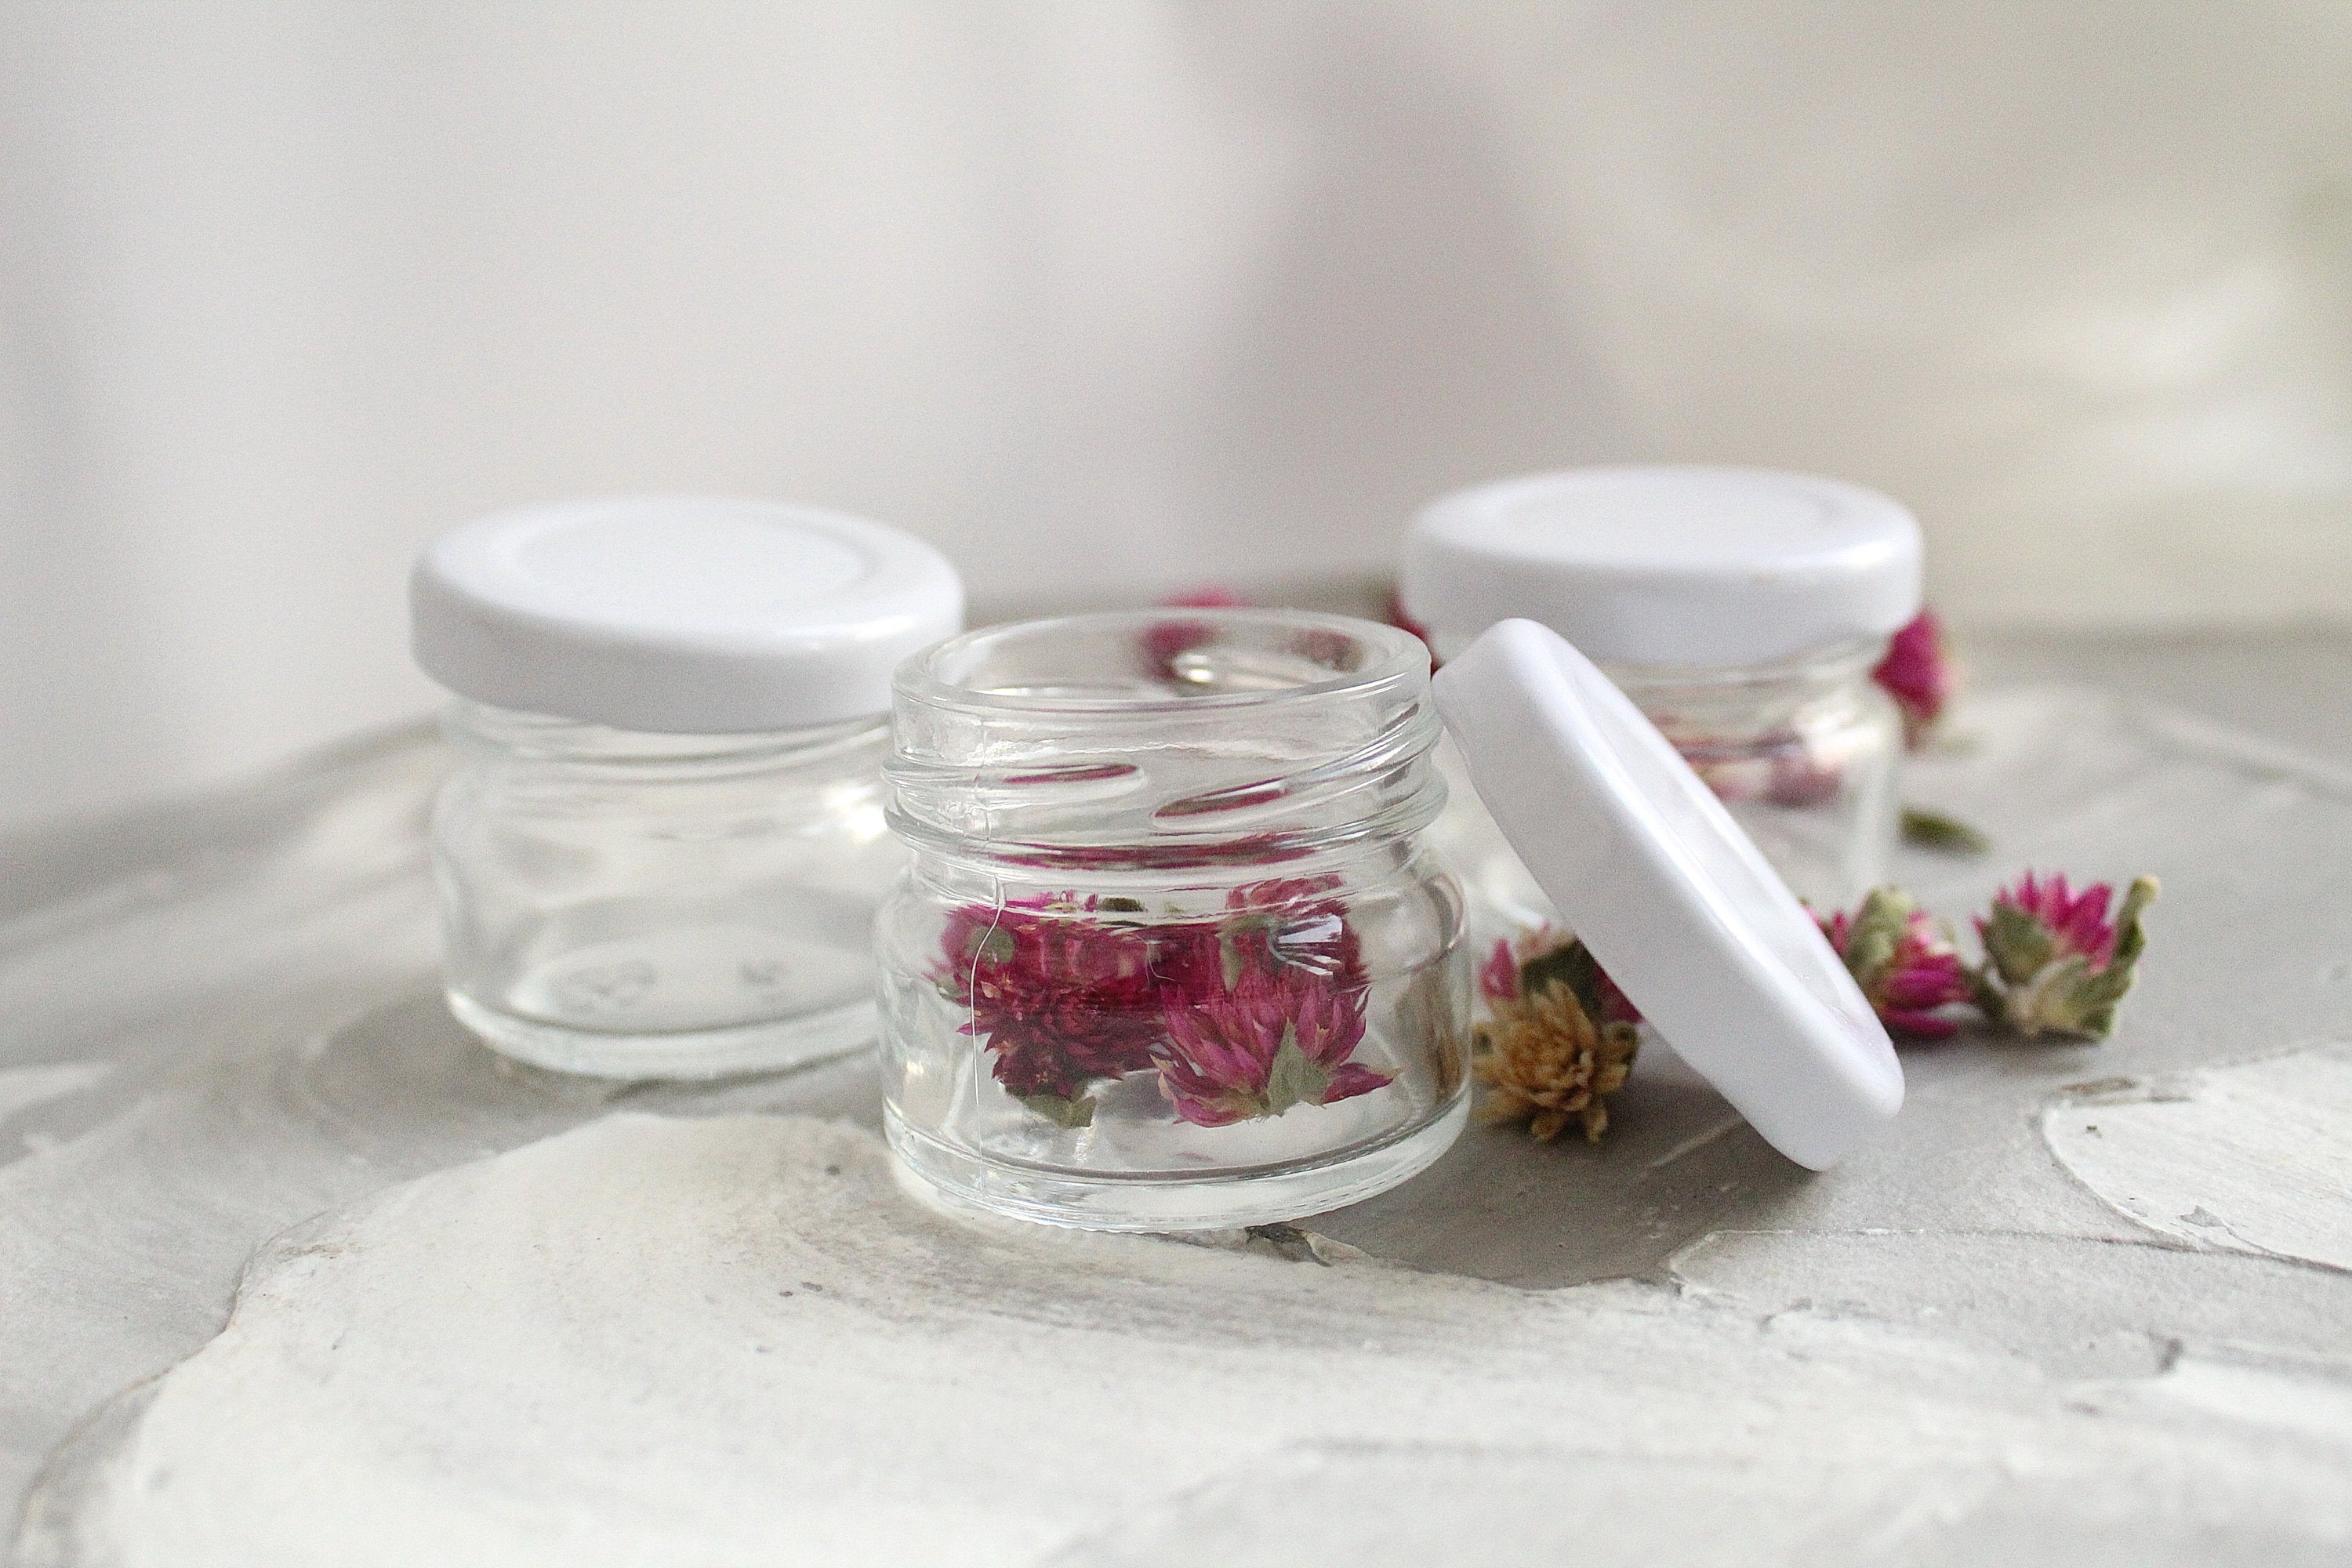 free 6 pcs of 1 oz (30ml) Small Glass Jars, Colorful Lids, Free of BPA, Plastisol Lined, Food Grade